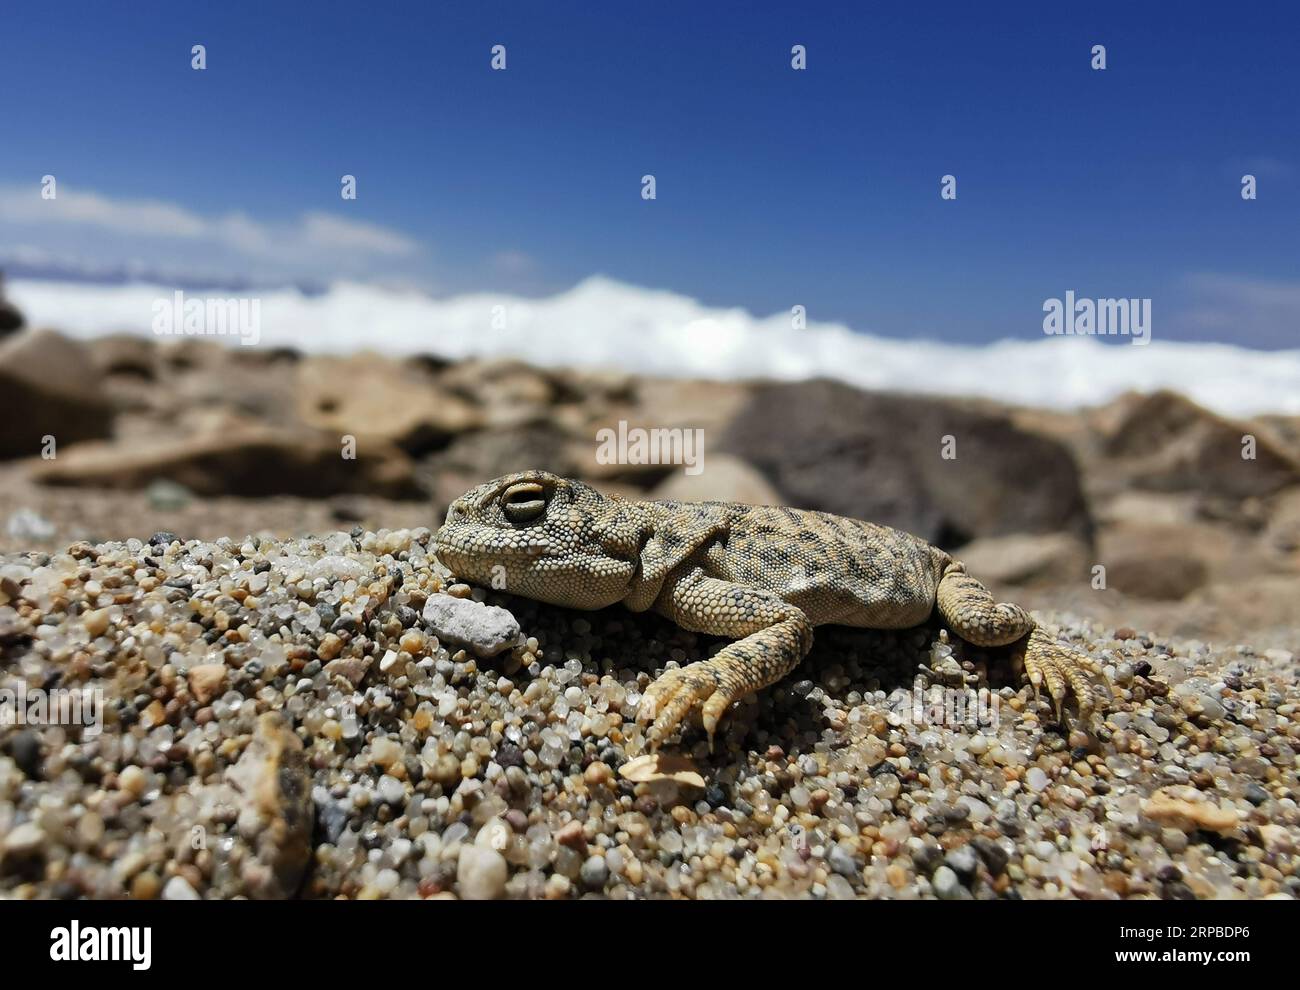 (190606) -- LHASA, June 6, 2019 (Xinhua) -- A lizard is seen at Nam Co (Lake), southwest China s Tibet Autonomous Region, May 8, 2019. Monitoring data provided by Chinese Academy of Sciences and departments on environmental protection shows that Tibet maintains a stable ecological structure in terms of its air, sound, water, soil, radiation level and ecological environment. With most areas remaining their original states in ecology, Tibet is one of the regions with best ecological conditions in the world. So far Tibet has established a well-distributed ecological environment protection network Stock Photo